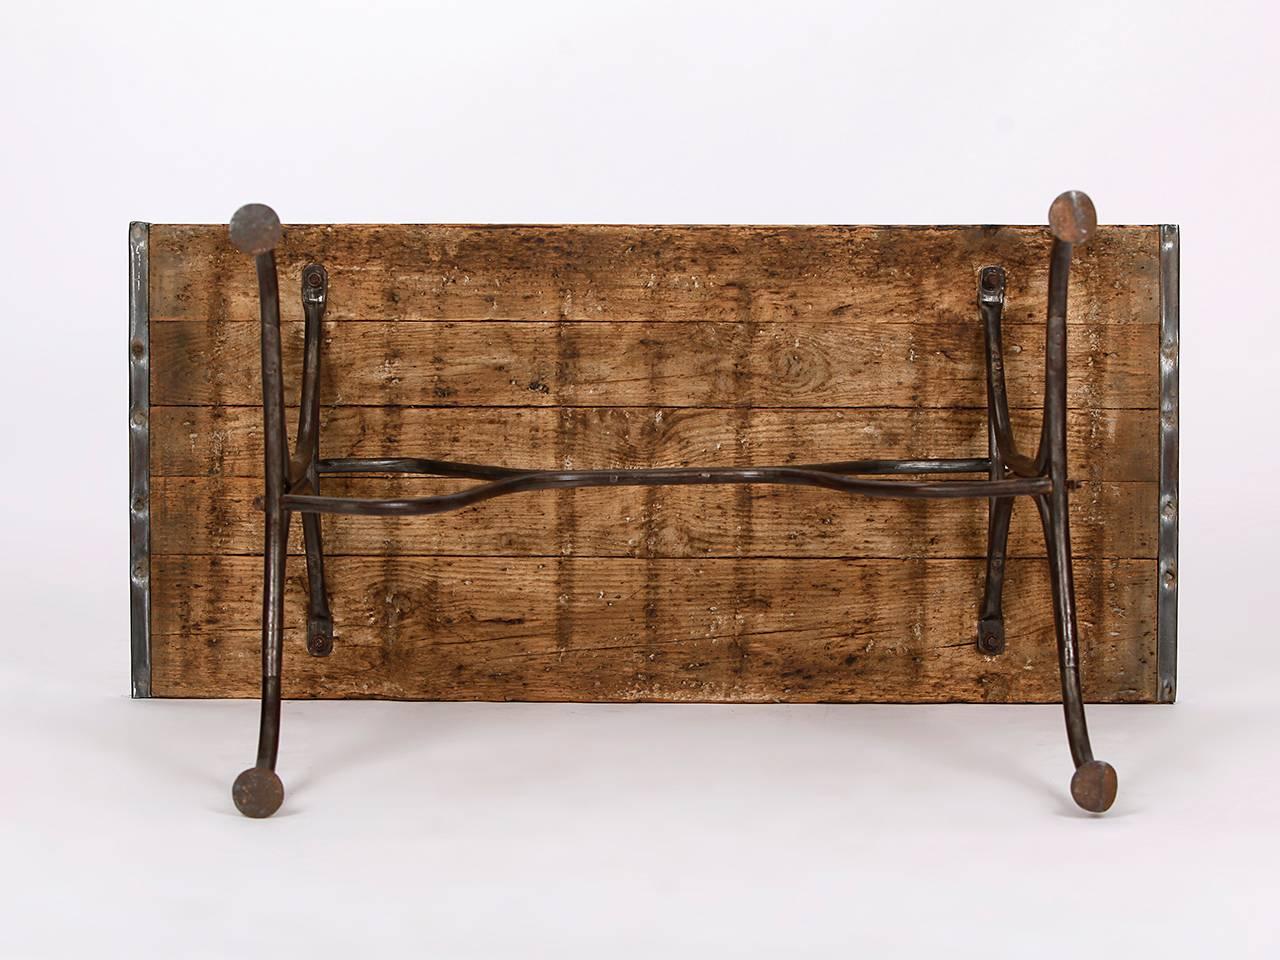 Iron Industrial Table, 1920s